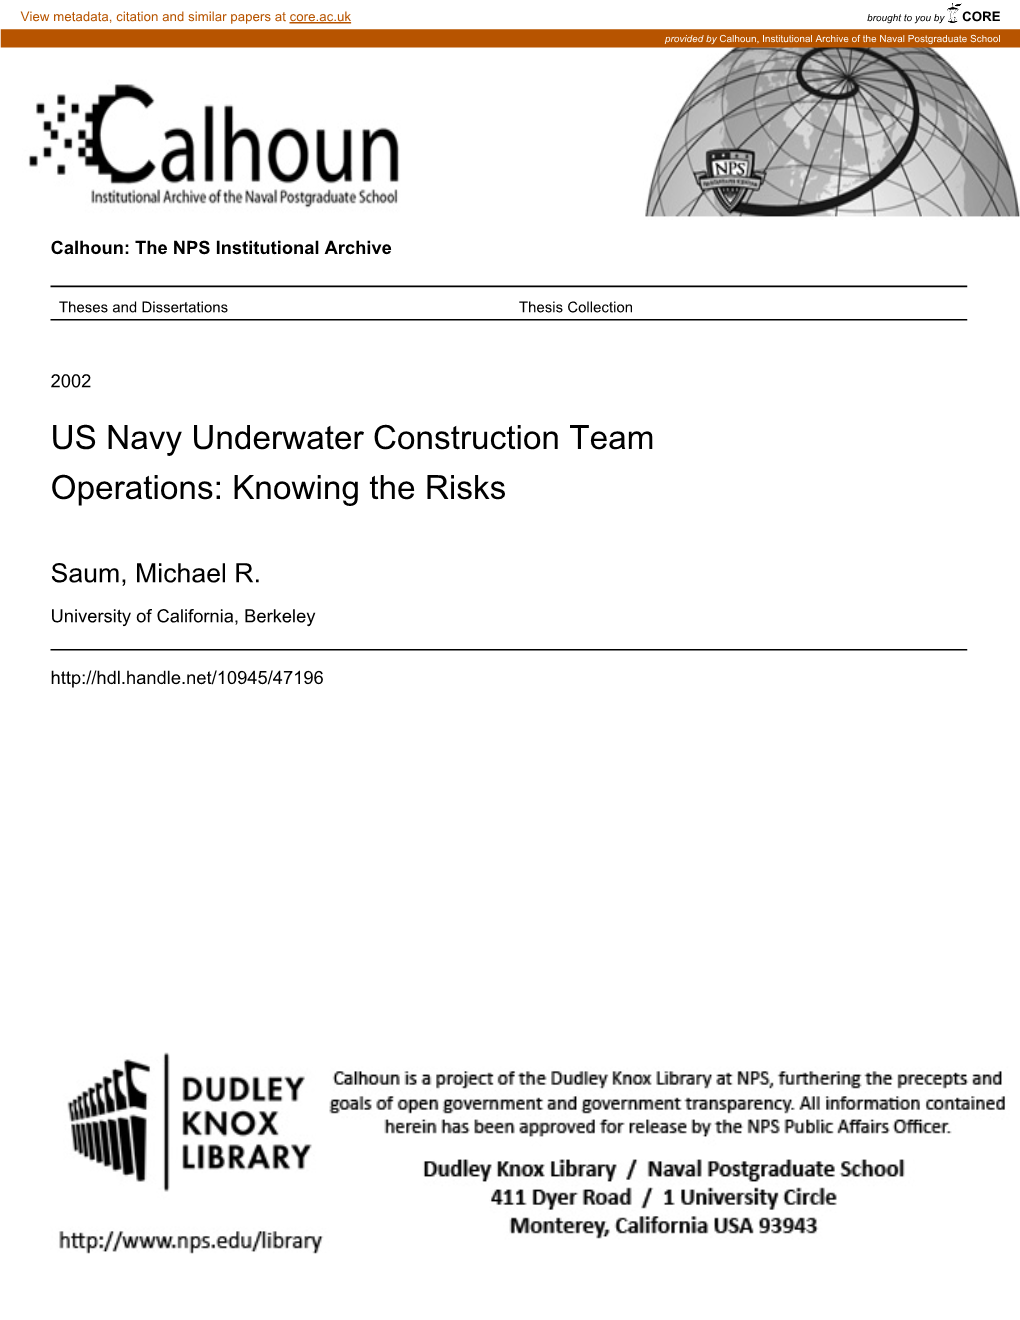 US Navy Underwater Construction Team Operations: Knowing the Risks